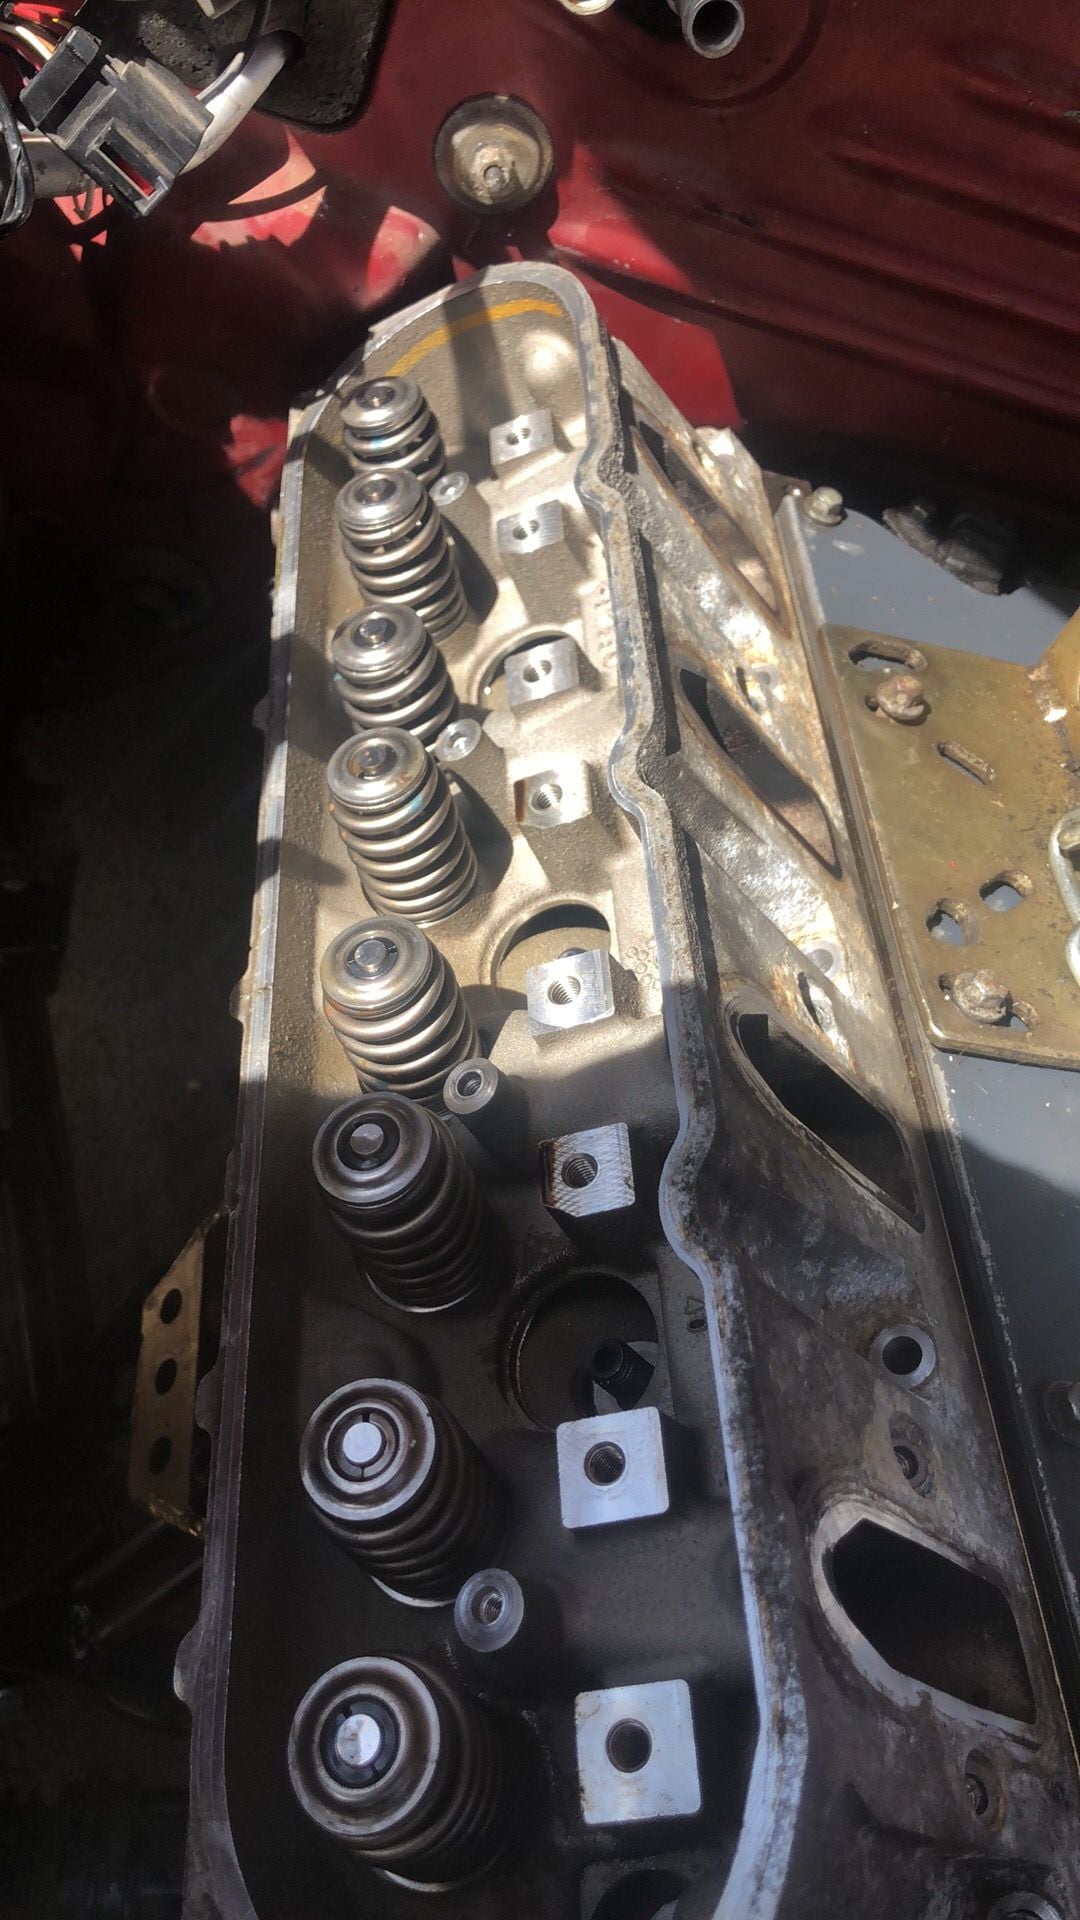  - 799/243 heads TBSS intakes - Hagerstown, MD 21742, United States